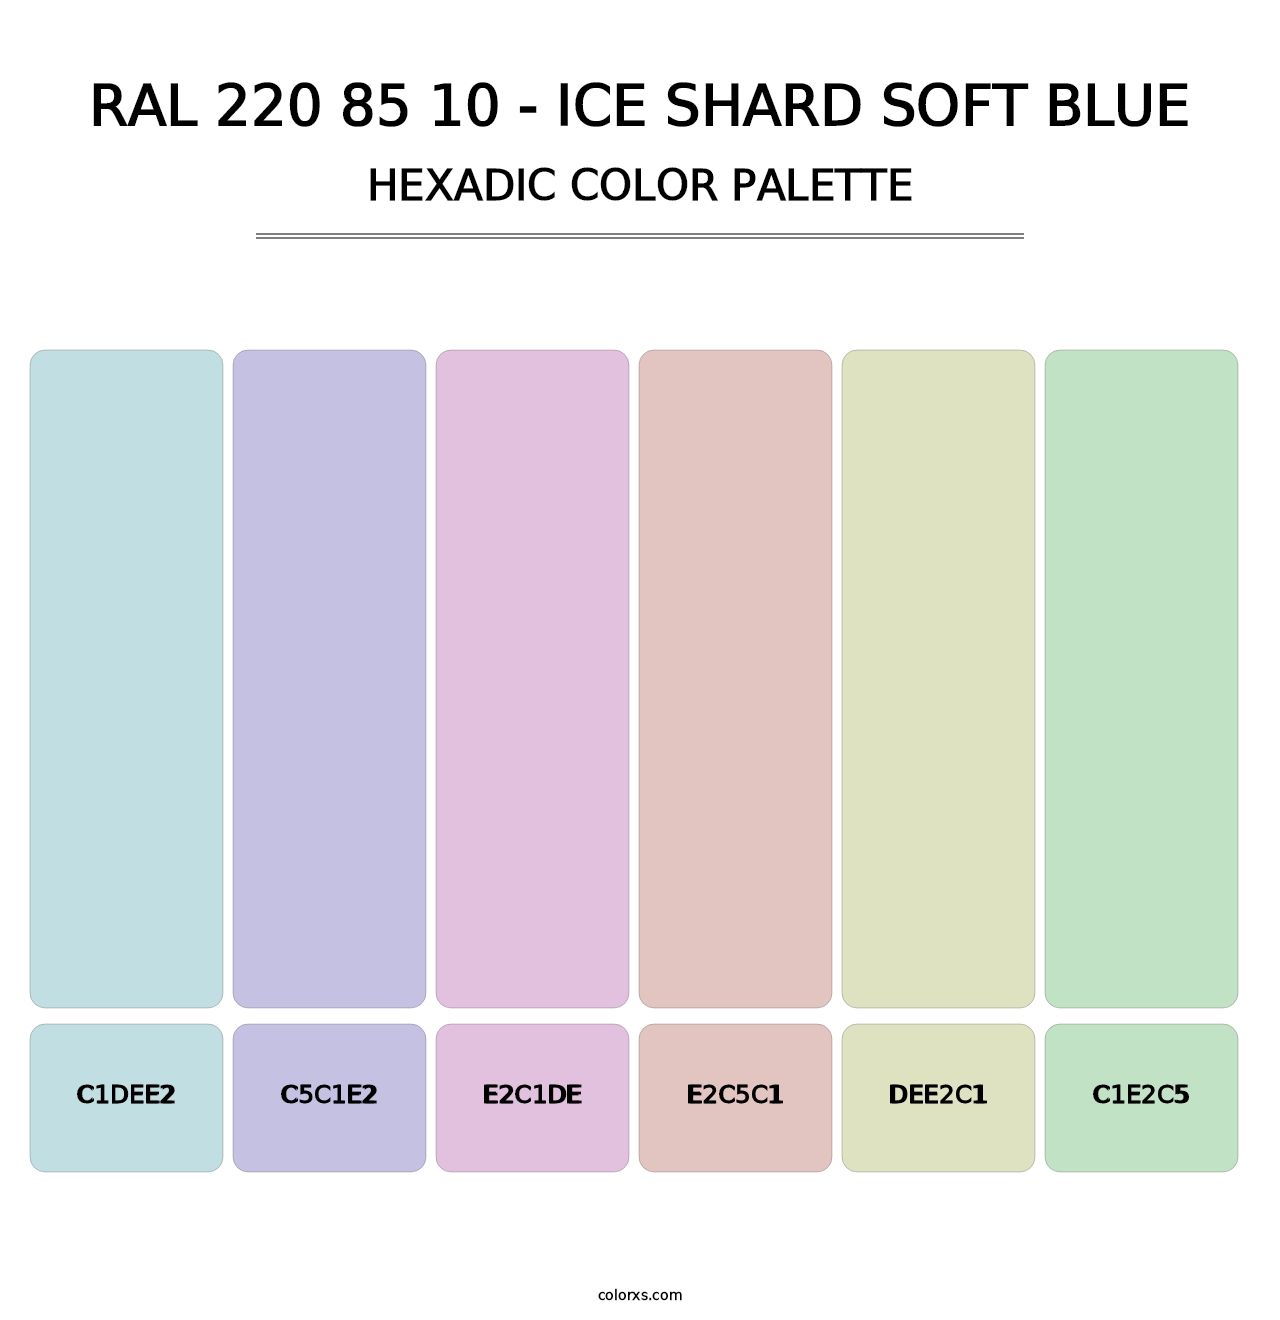 RAL 220 85 10 - Ice Shard Soft Blue - Hexadic Color Palette